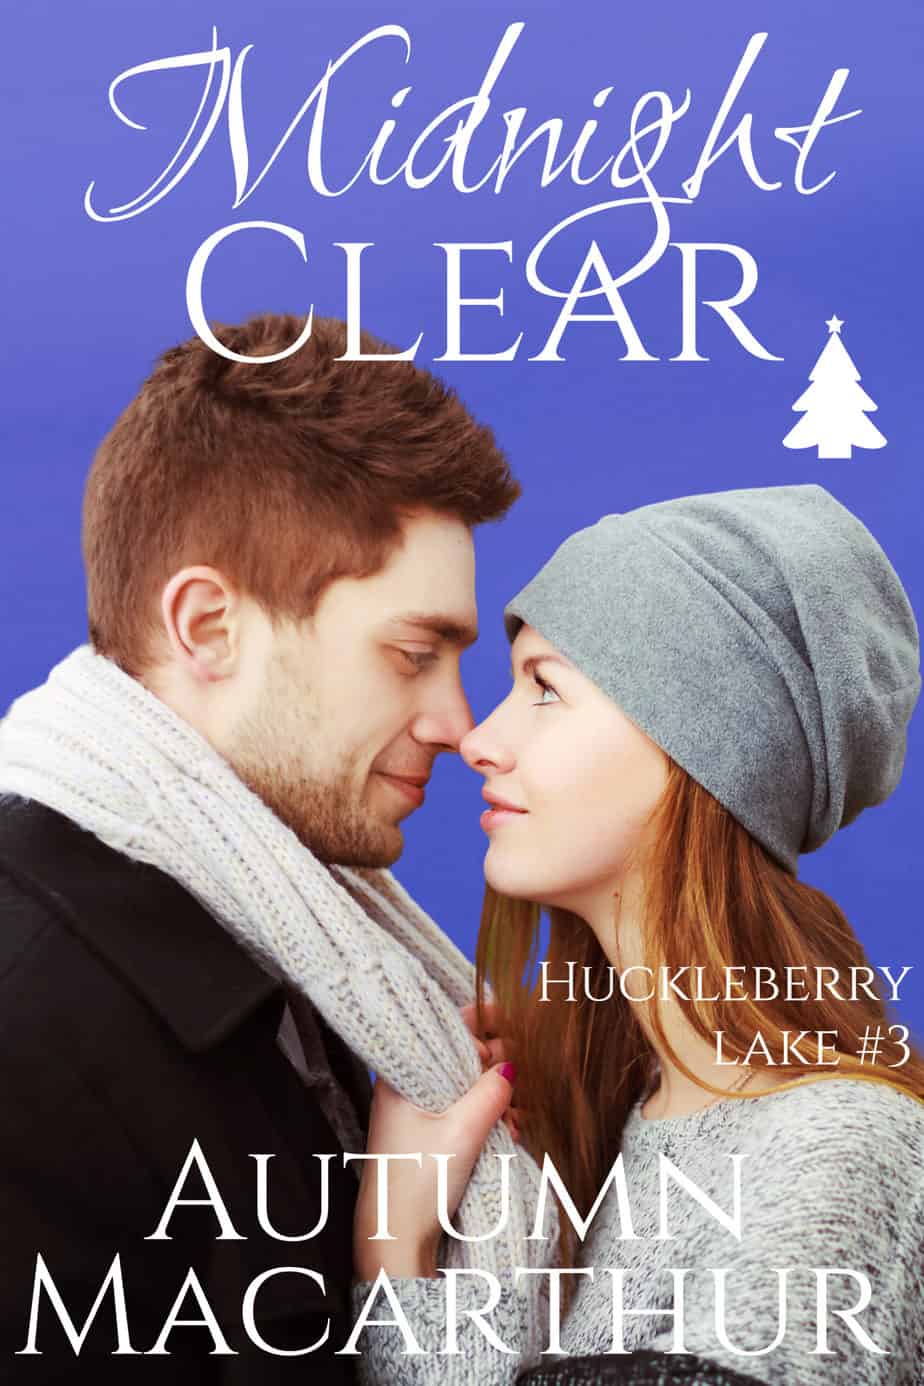 cover image for Midnight Clear, new Christian romance by Autumn Macarthur